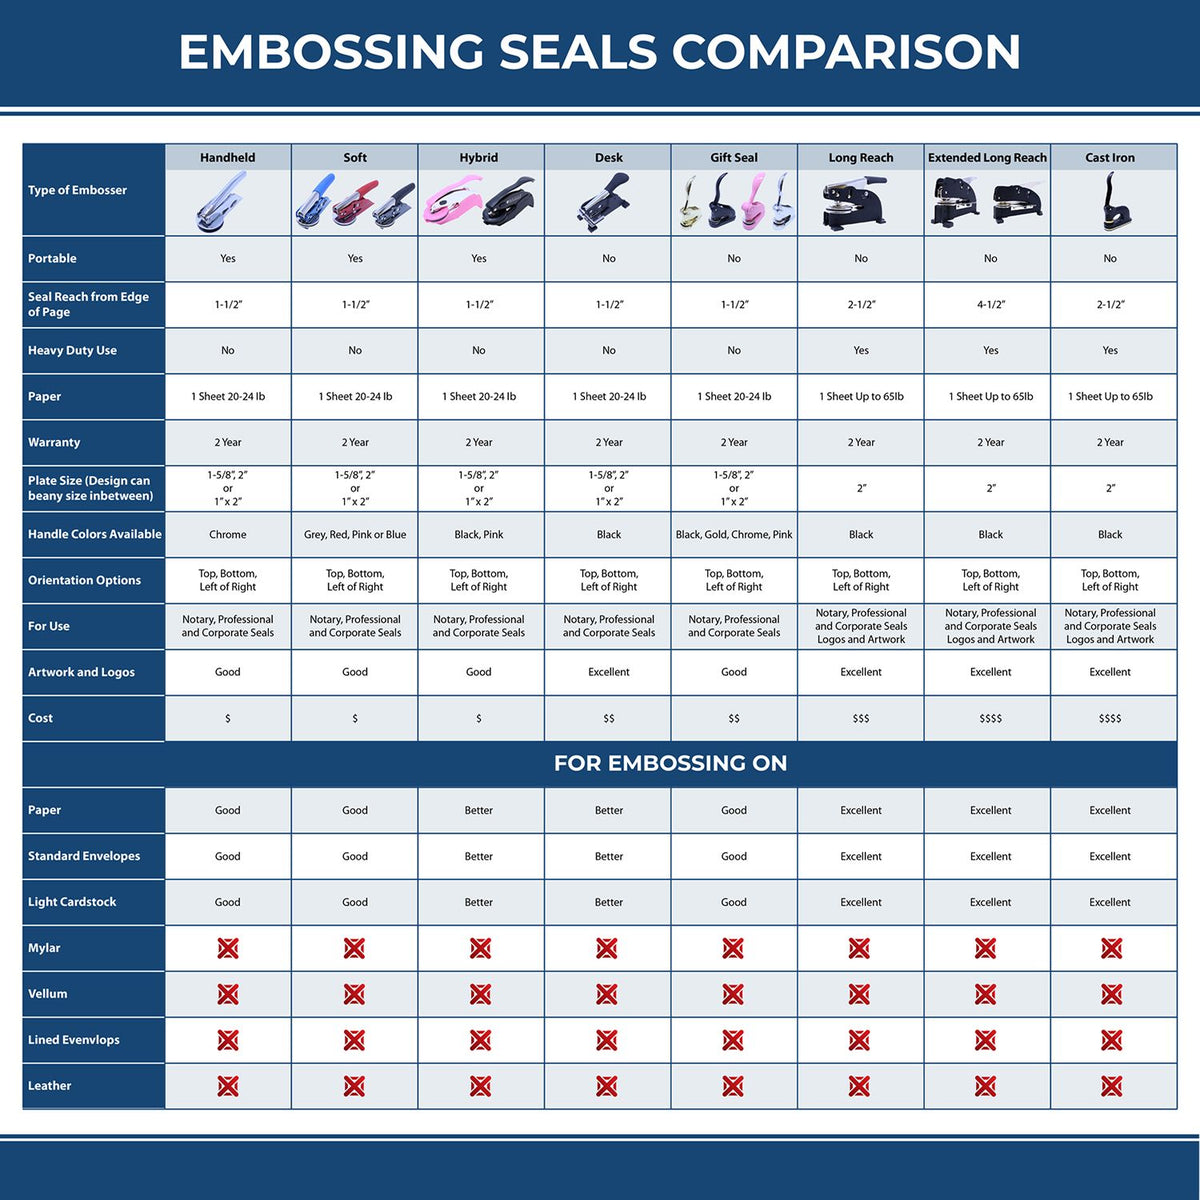 A comparison chart for the different types of mount models available for the Hybrid Connecticut Land Surveyor Seal